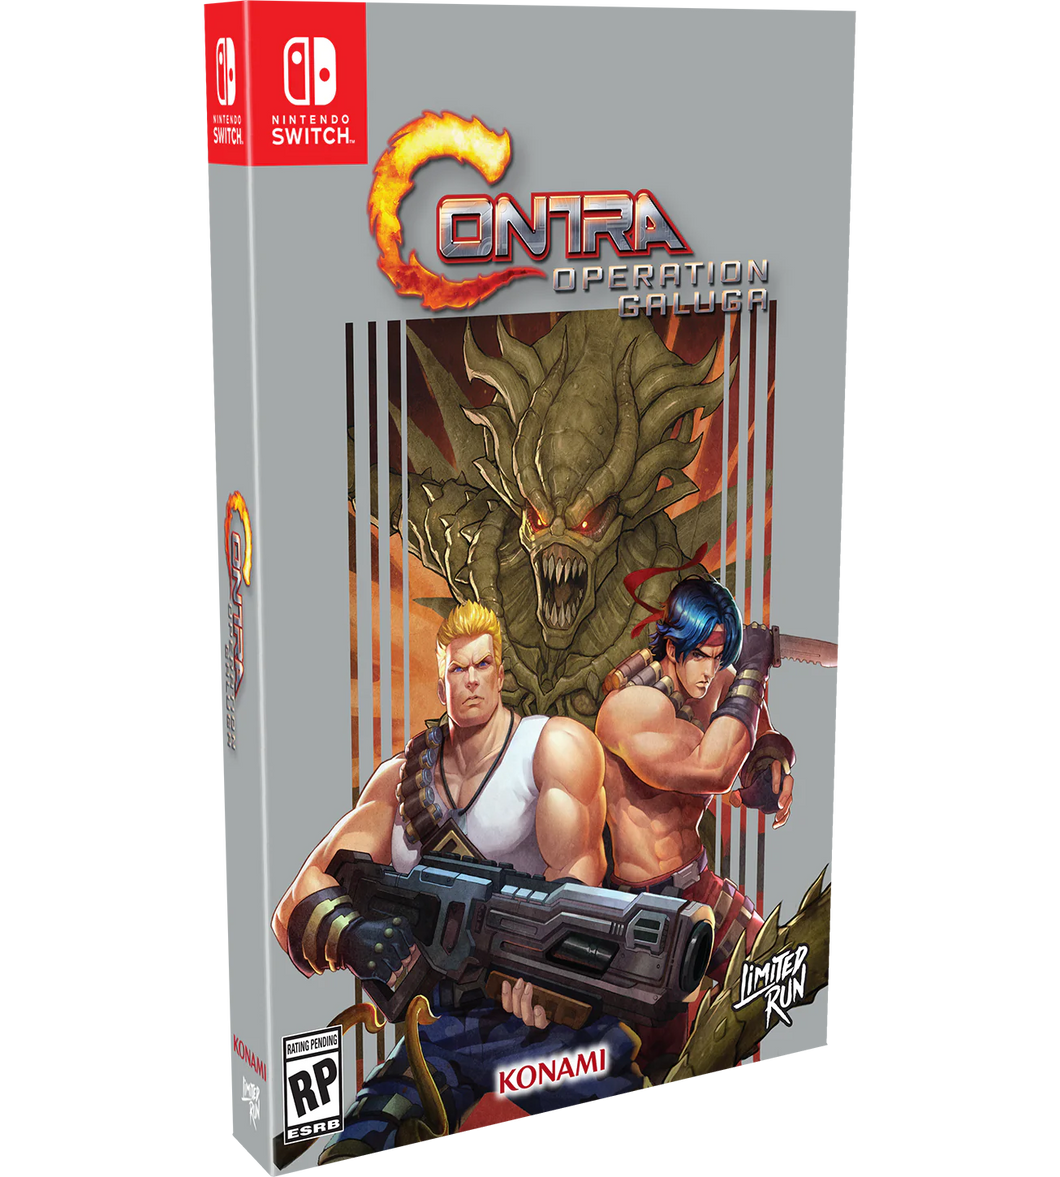 SWITCH LIMITED RUN #230: CONTRA: OPERATION GALUGA CLASSIC EDITION